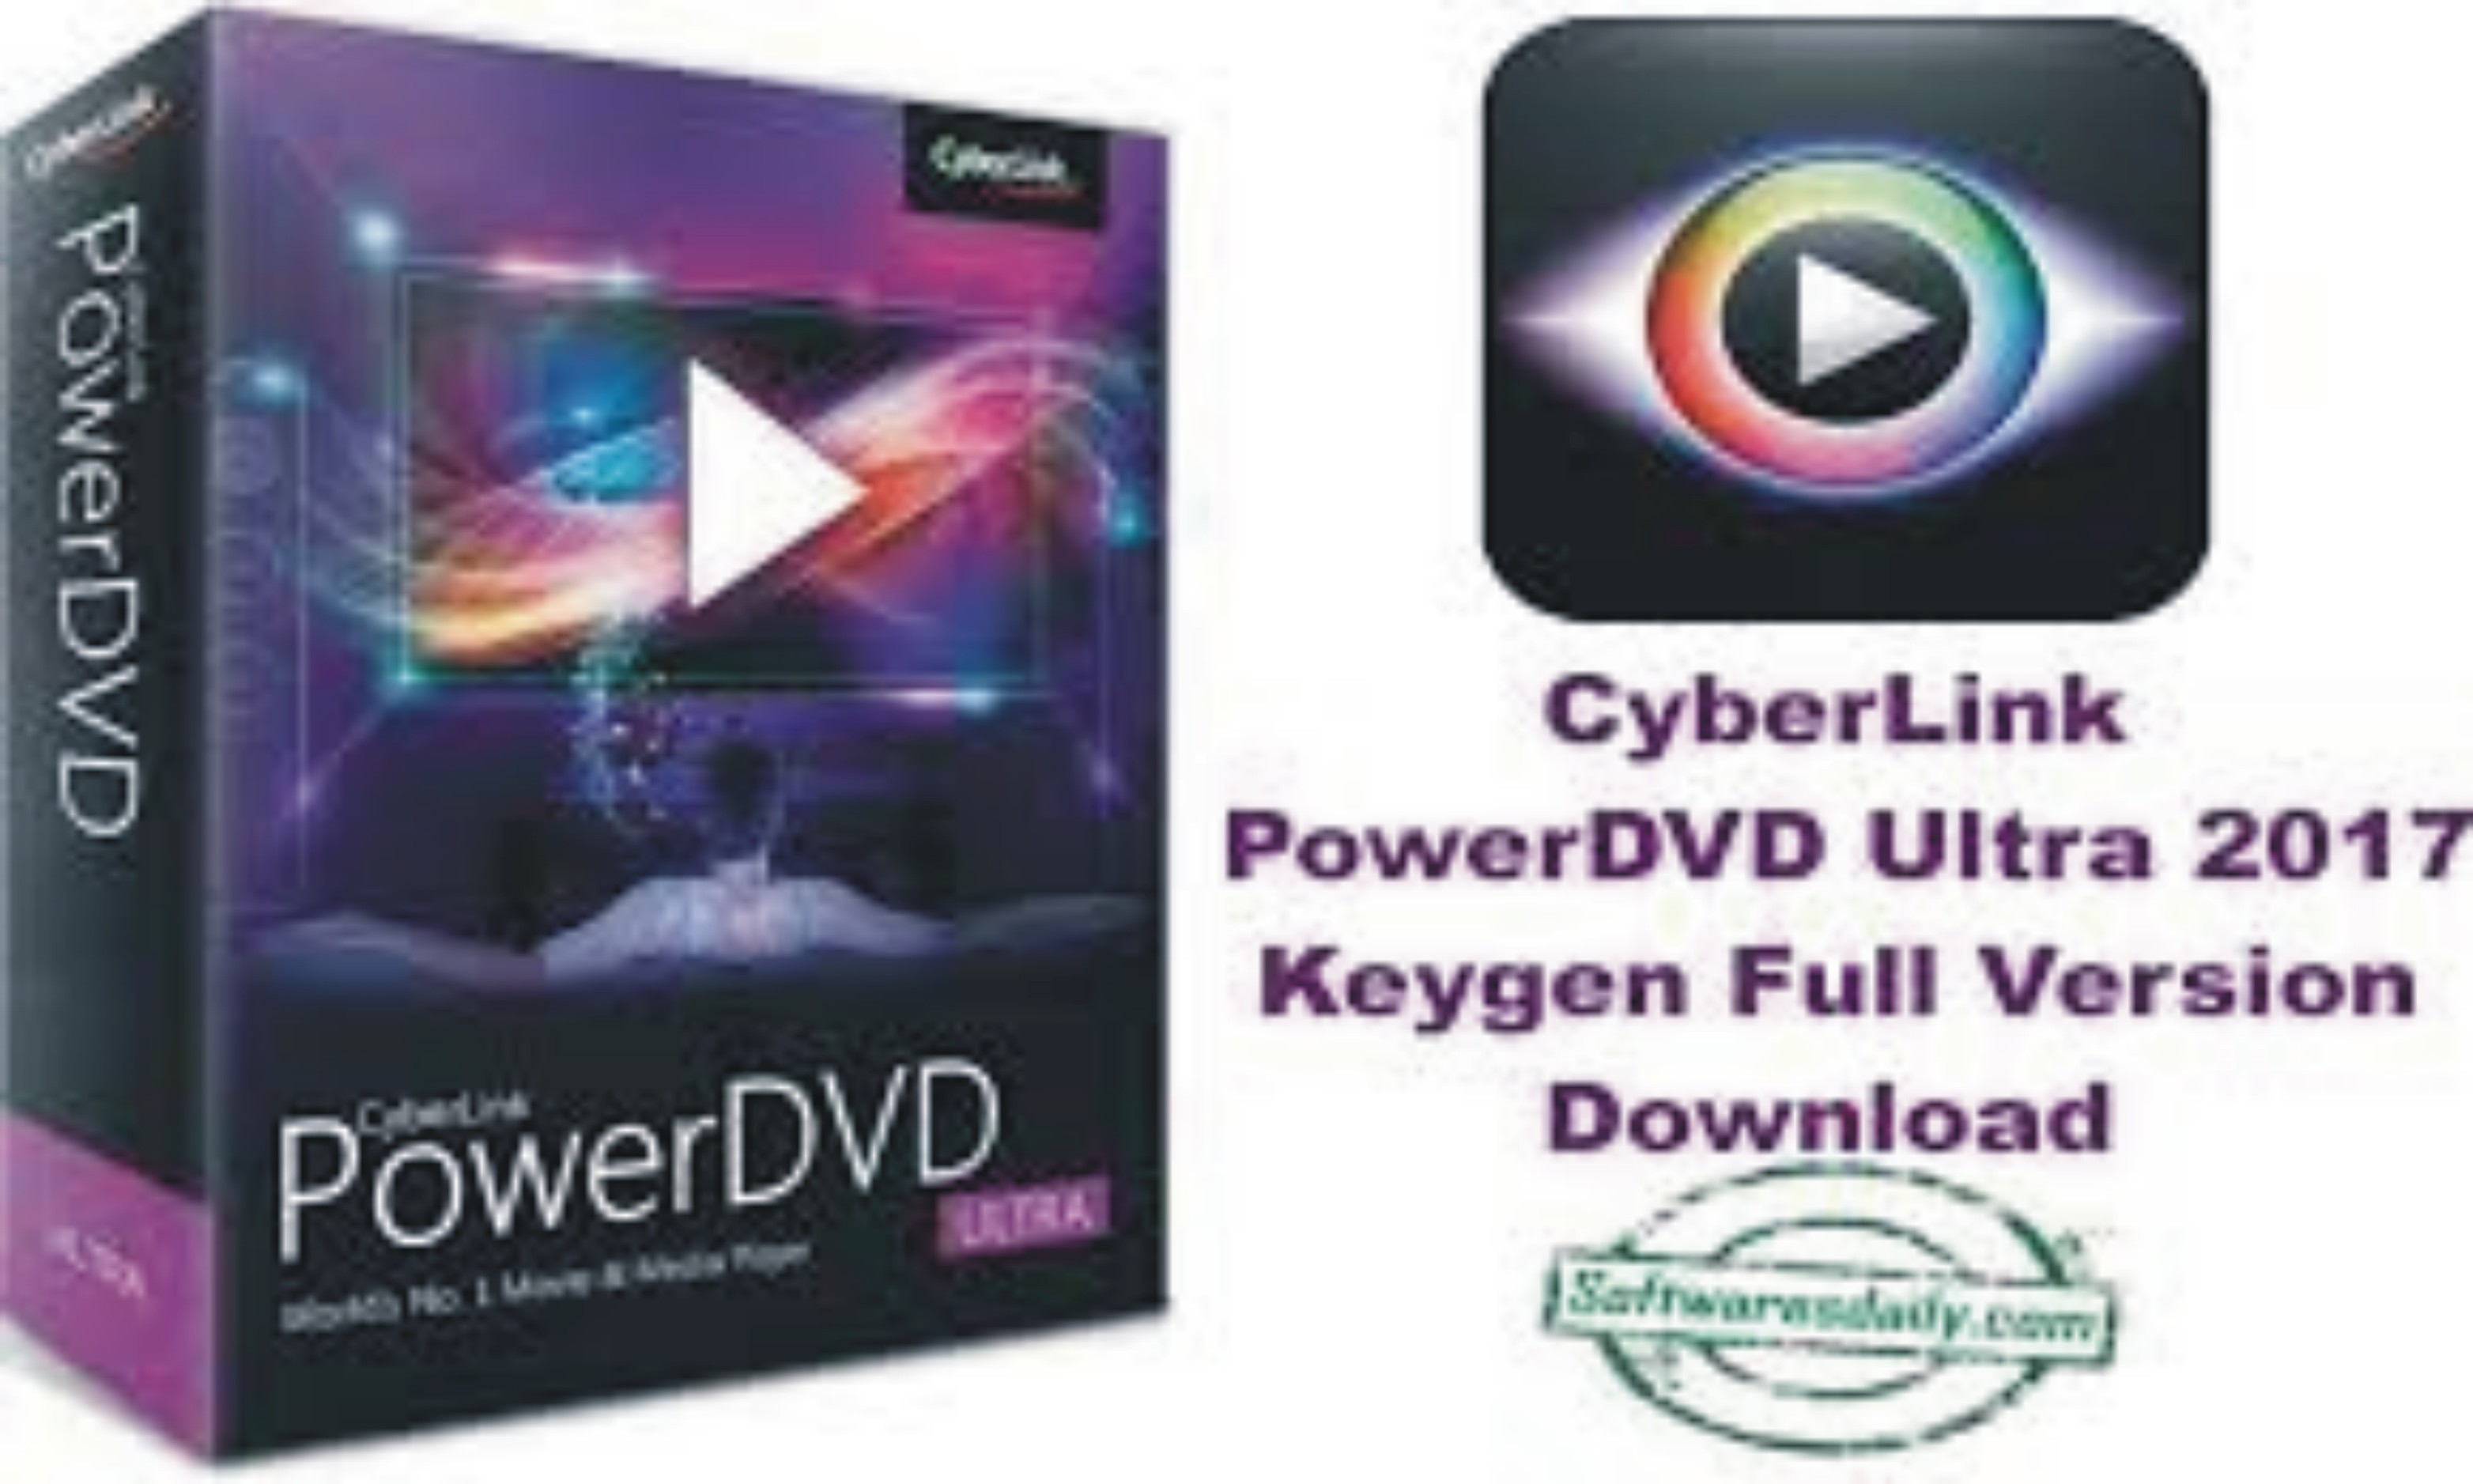 Cyberlink Powerdvd 11 free. download full Version With Crack